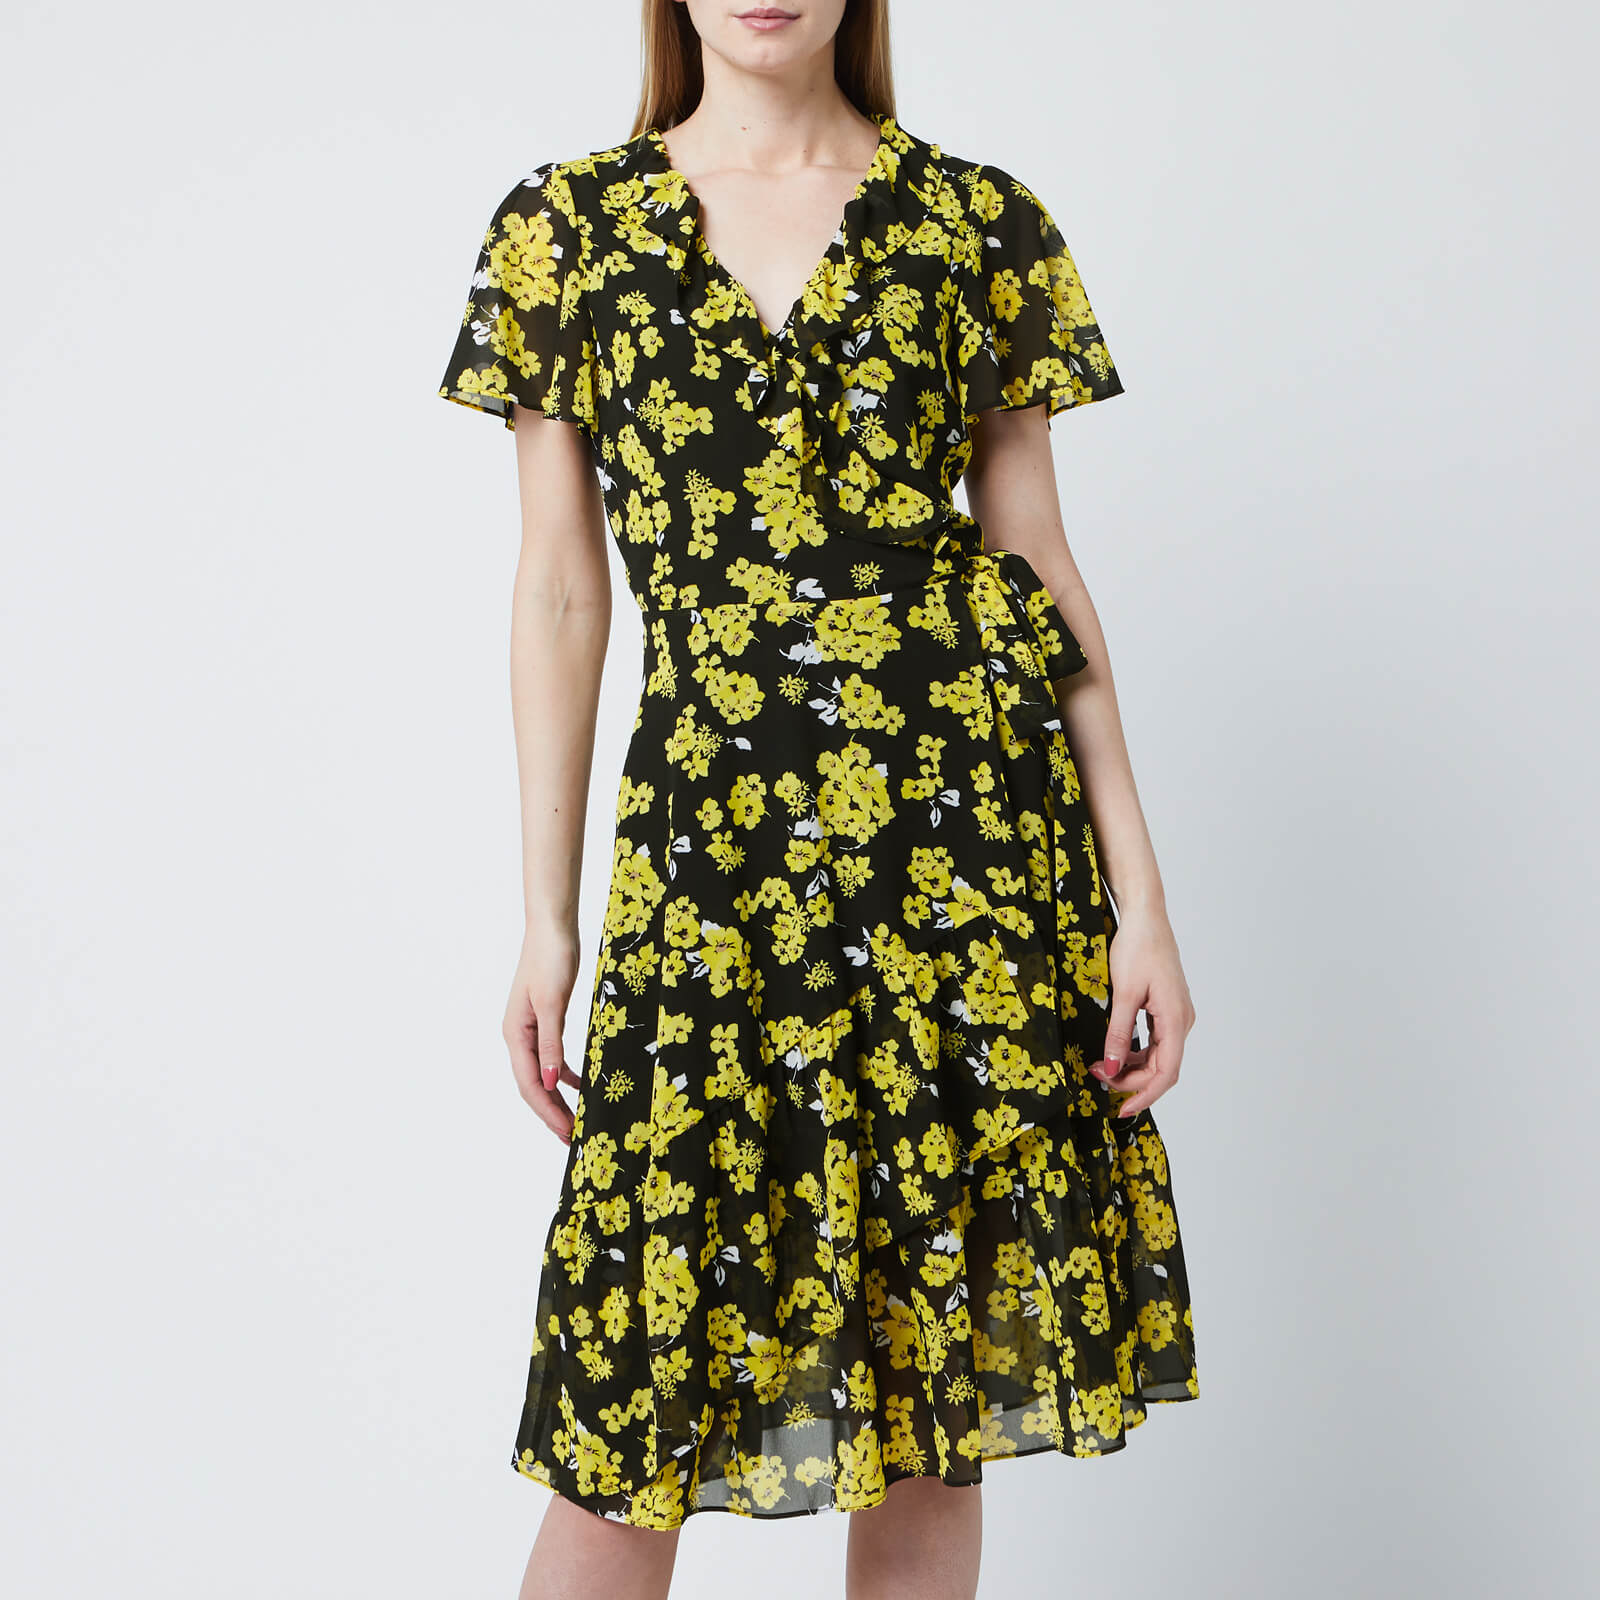 yellow dress with black flowers